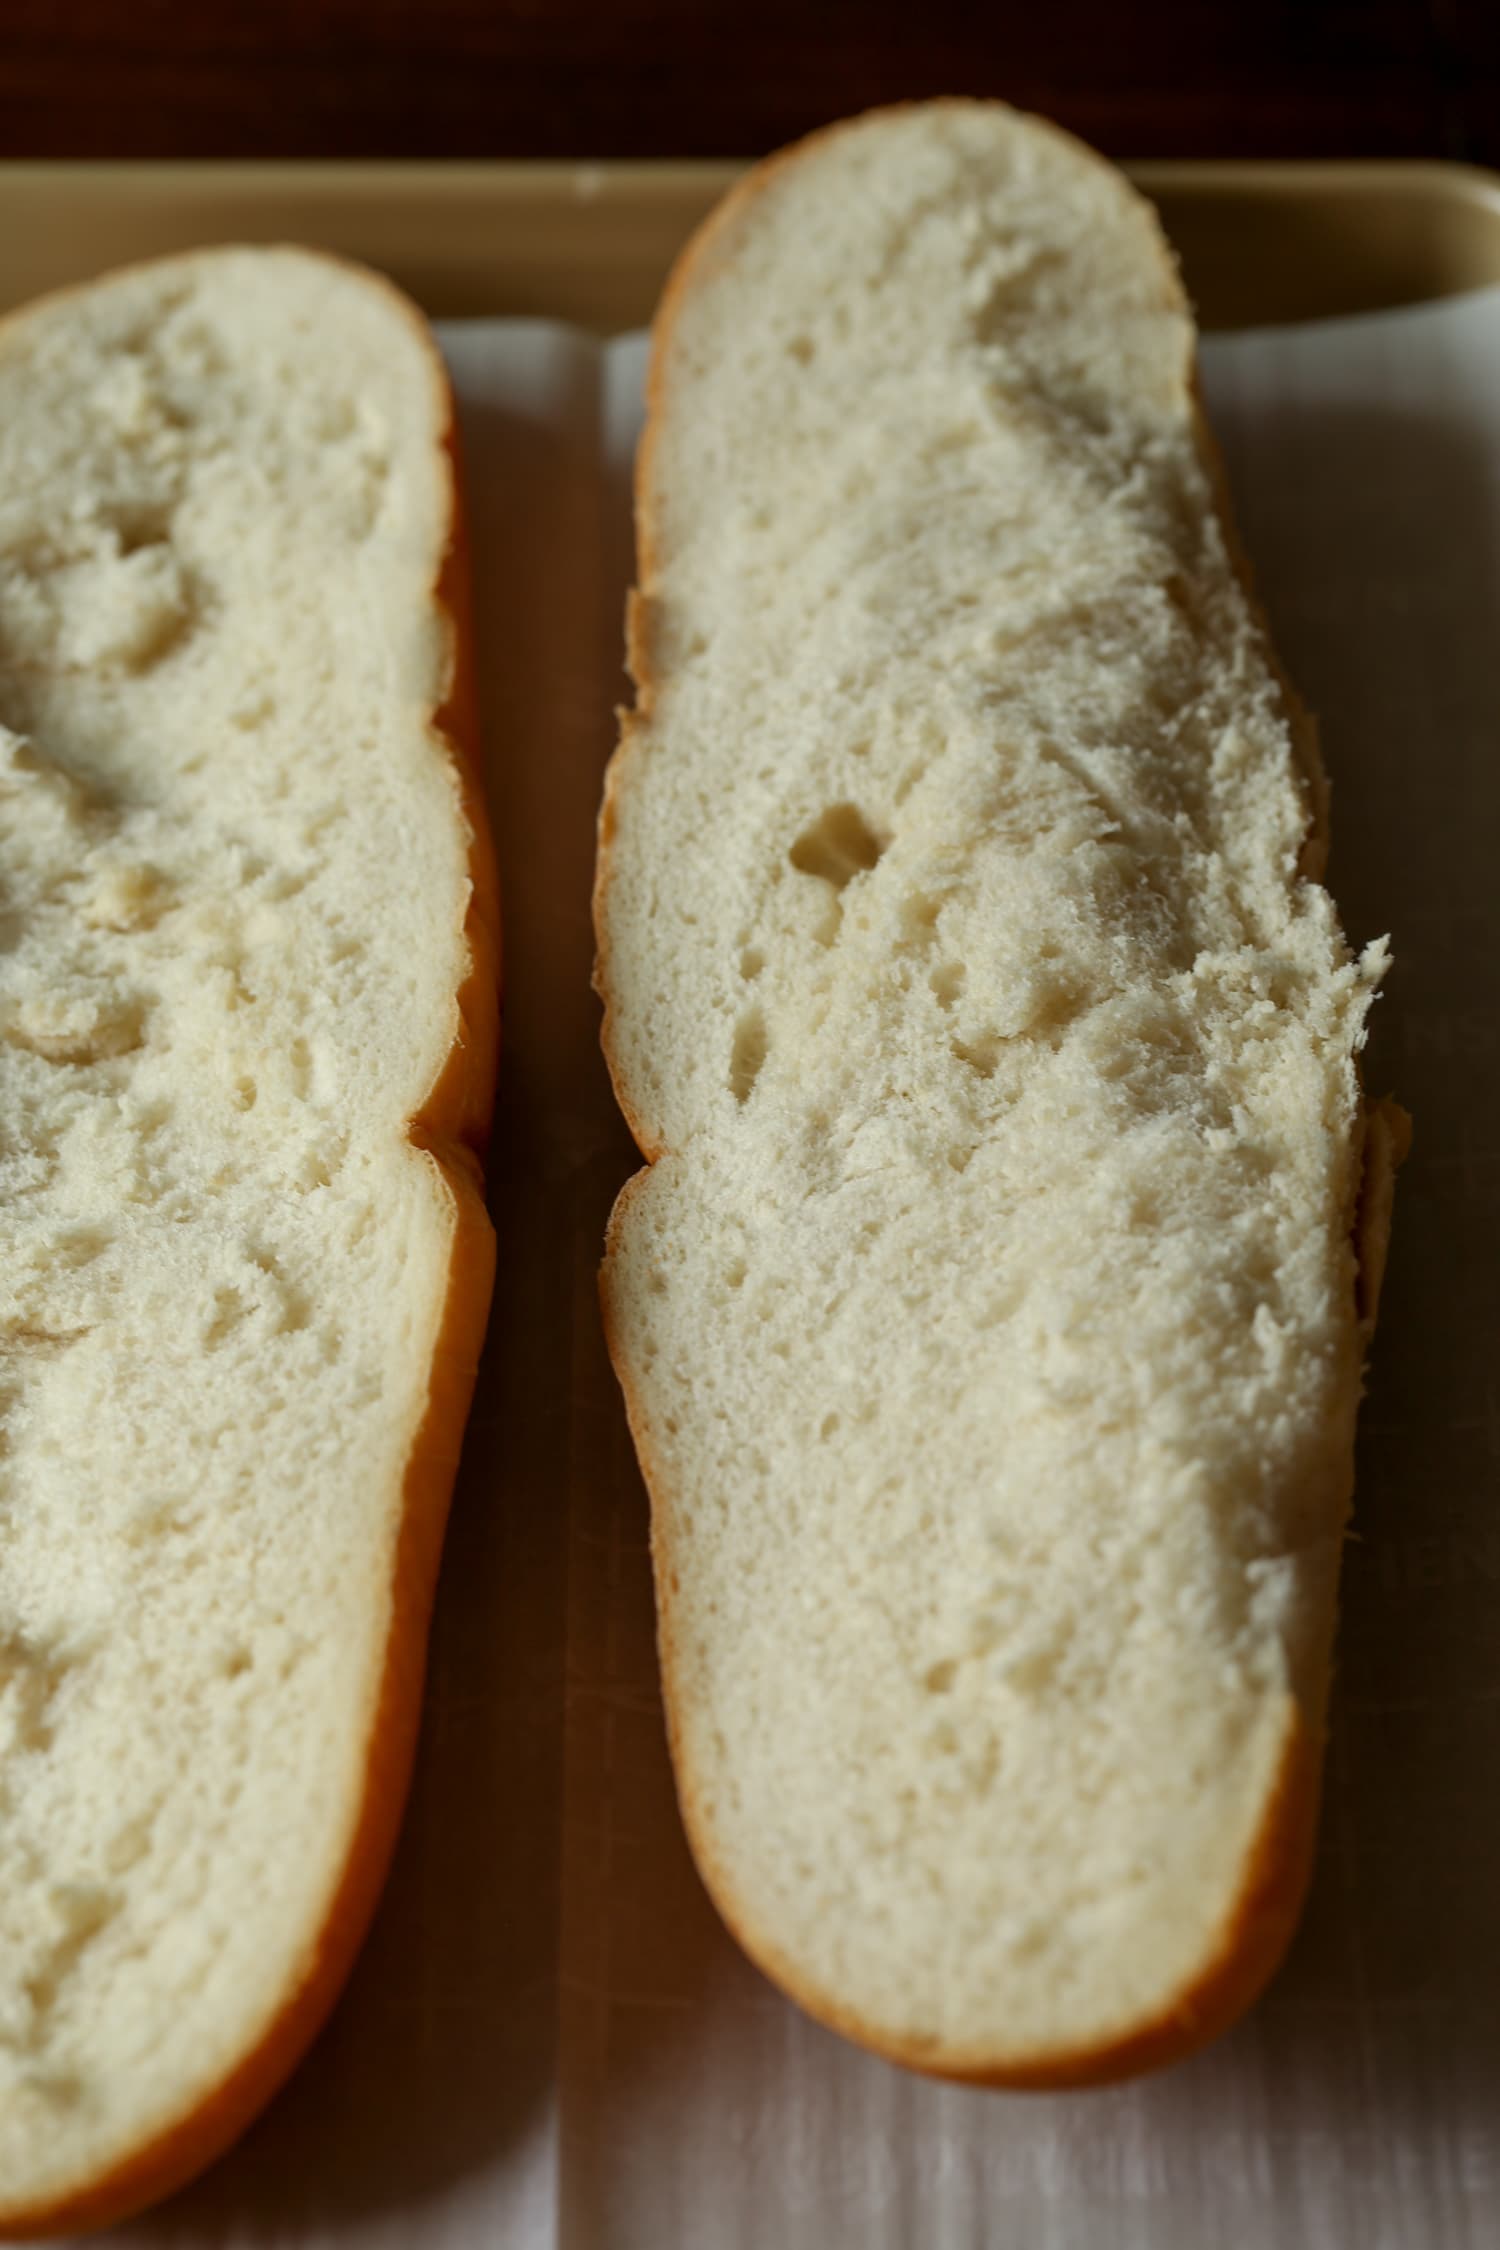 A French bread loaf cut in half lengthwise.